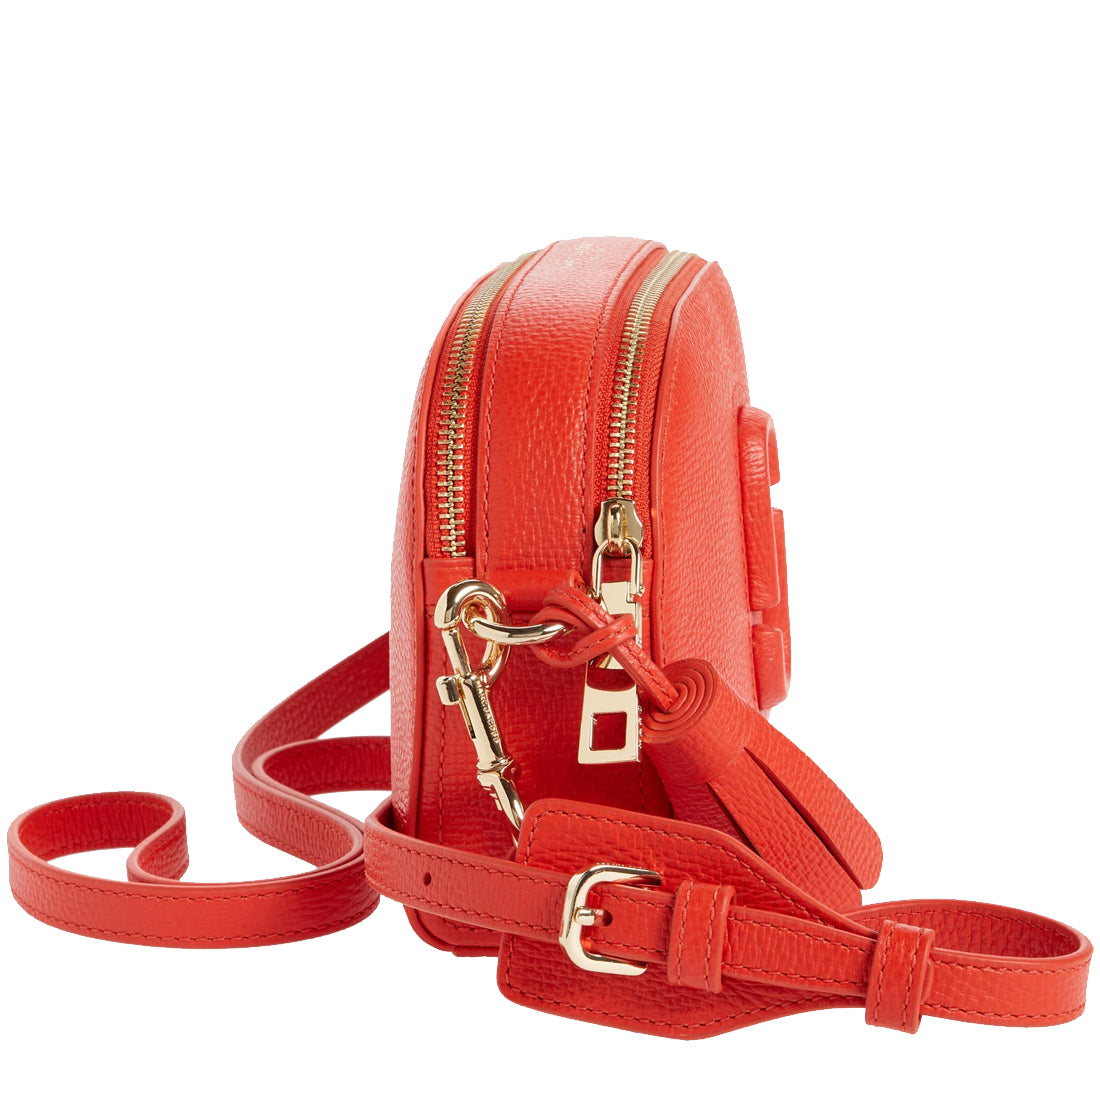 Marc Jacobs The Shutter Crossbody Bag in Poinciana M0015468 ...